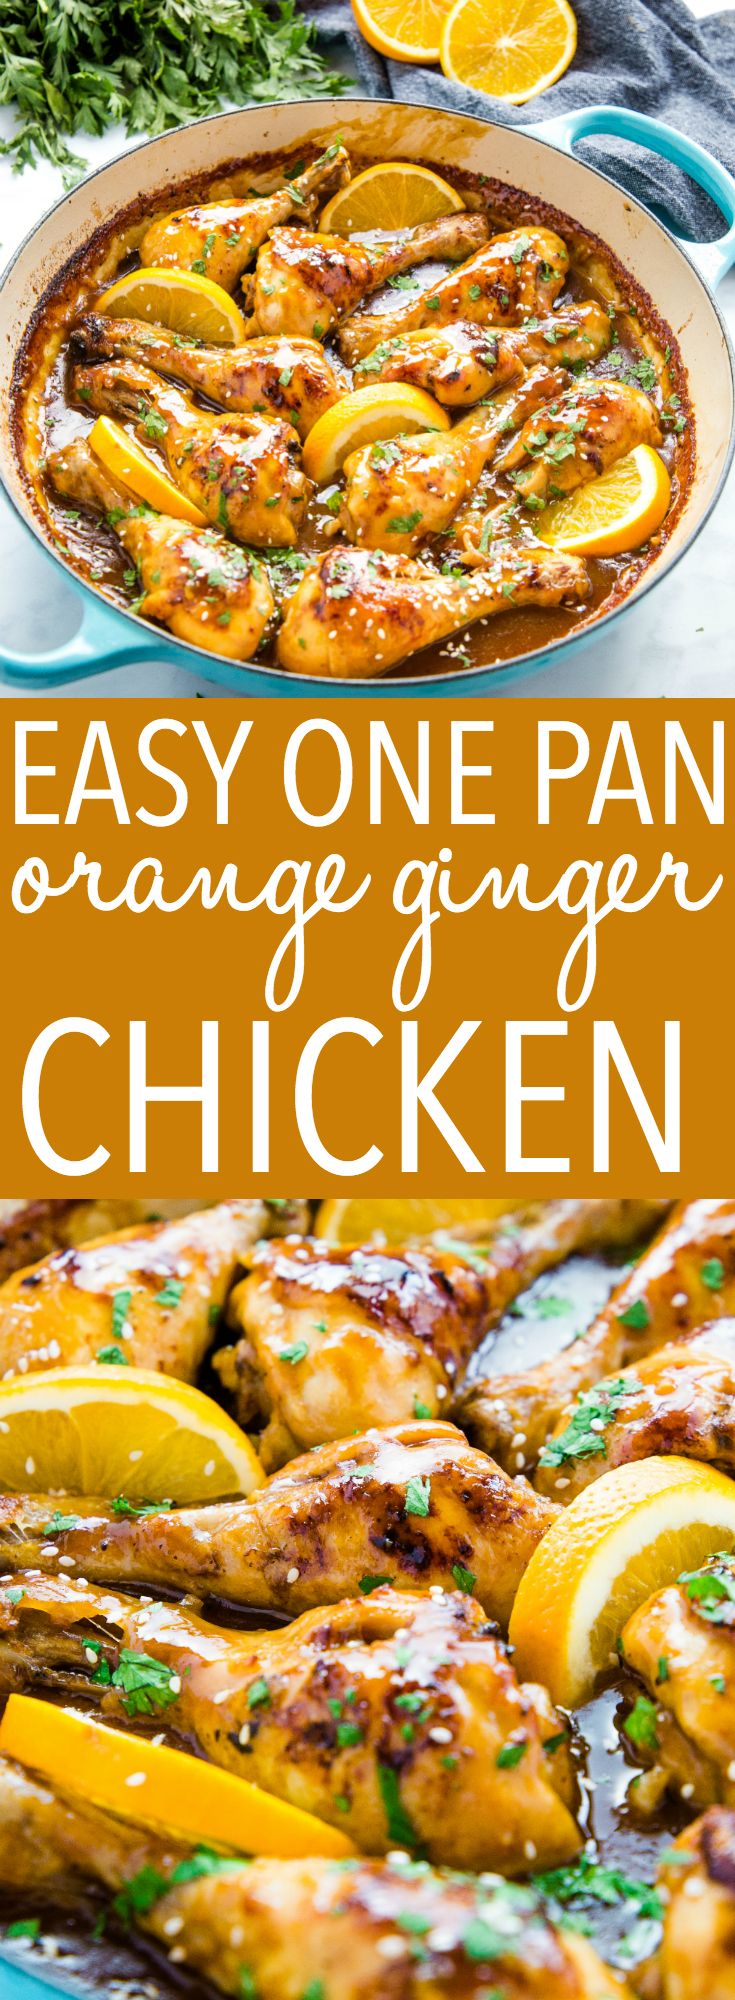 This Easy One Pan Orange Chicken recipe is a delicious weeknight meal idea - a sticky sweet sauce over tender chicken with fresh orange and ginger! Recipe from thebusybaker.ca! #orangechicken #gingerchicken #orange #ginger #chicken #onepan #easymeal #weeknightmeal #chickenrecipe #lecreuset #healthy #oven #roastedchicken via @busybakerblog